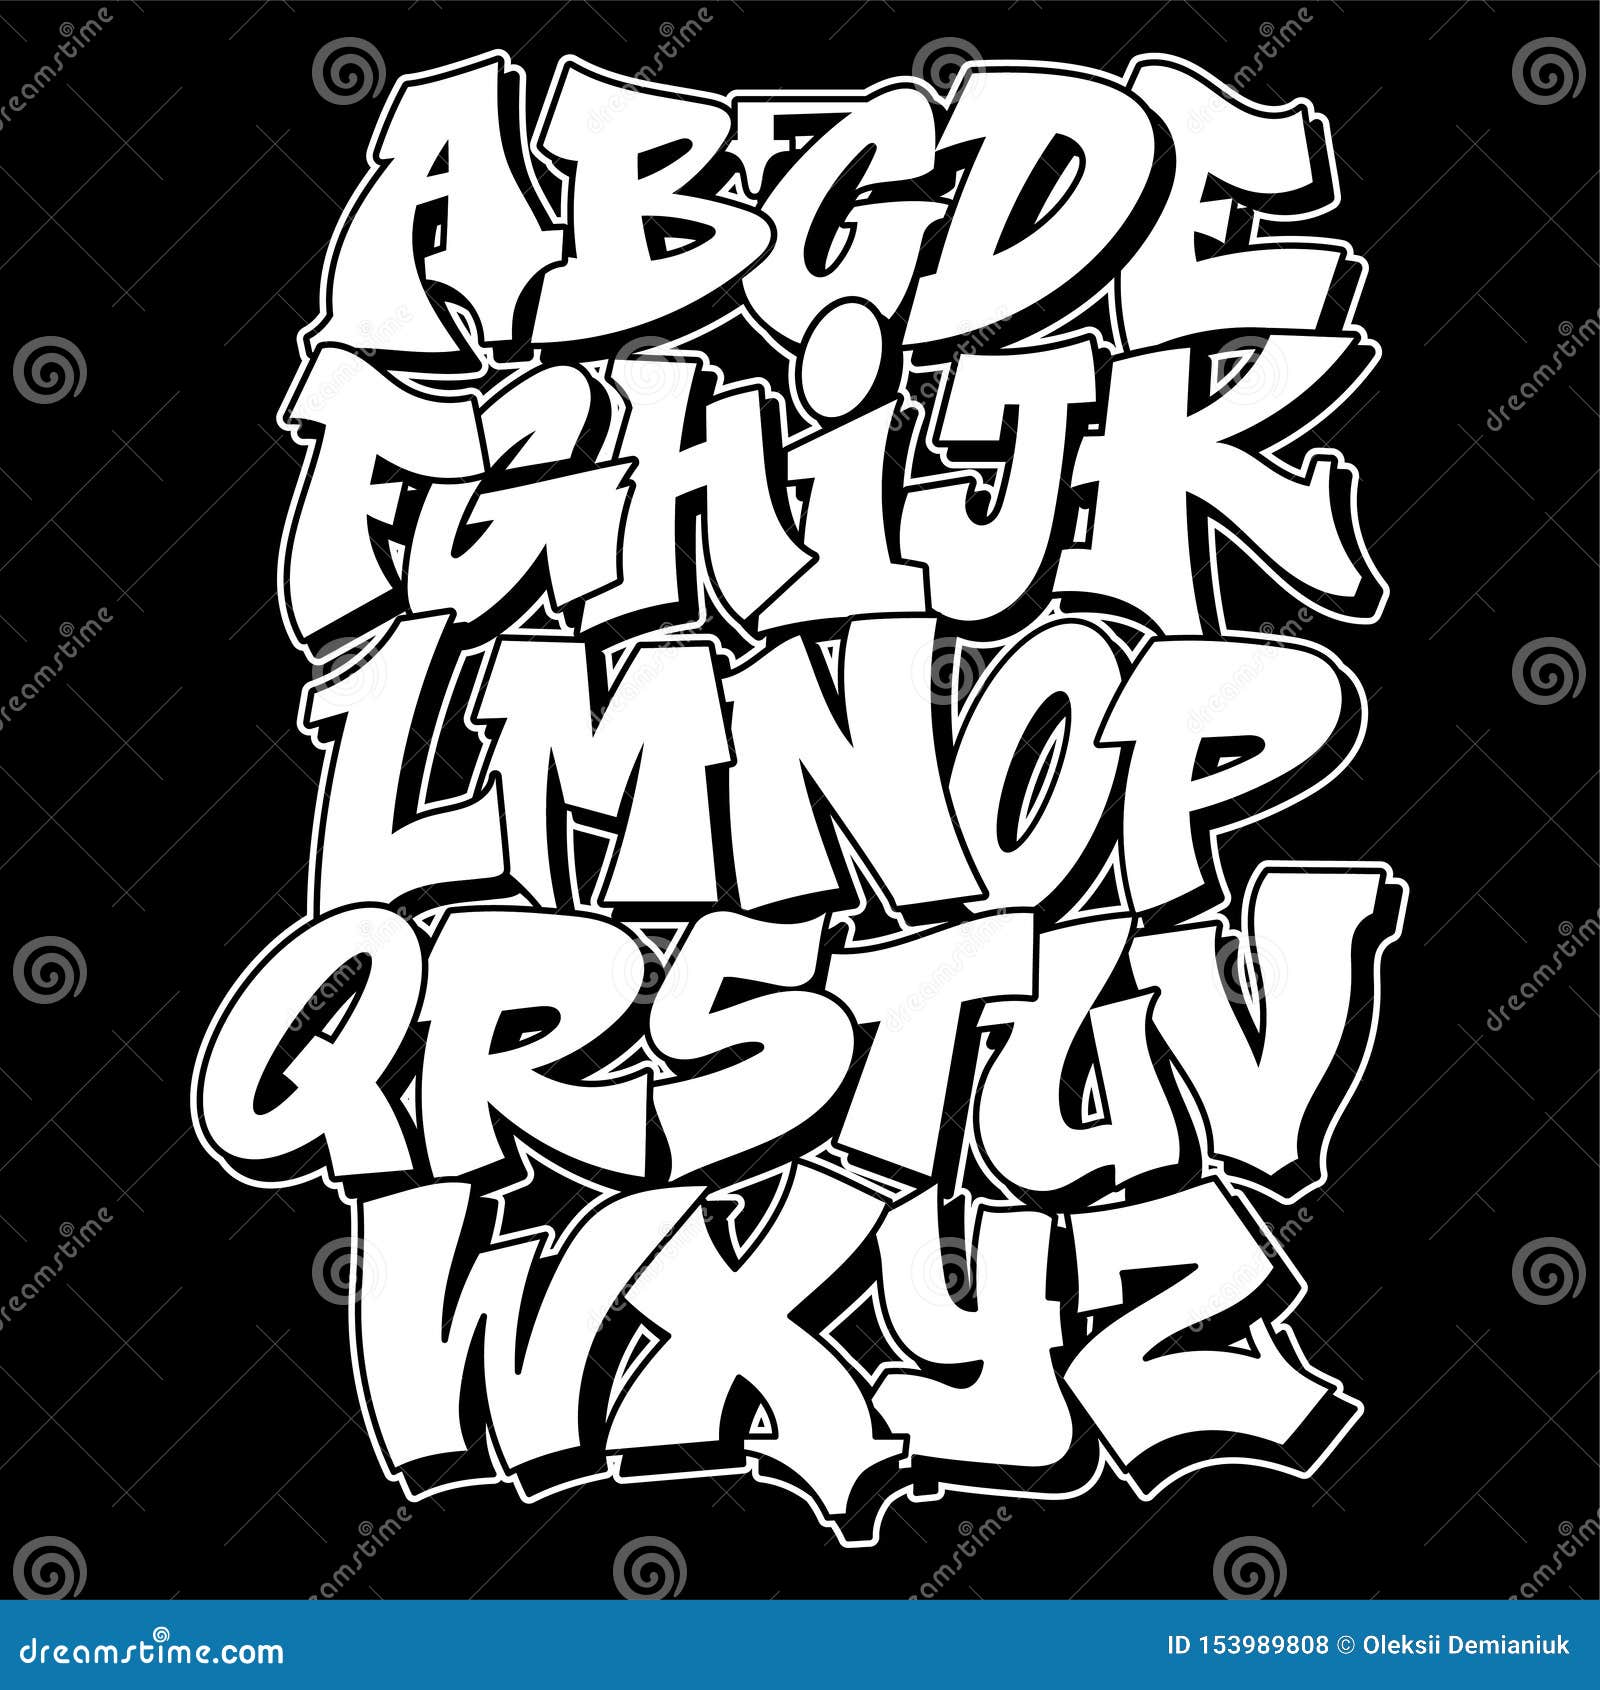 graffiti style lettering text 